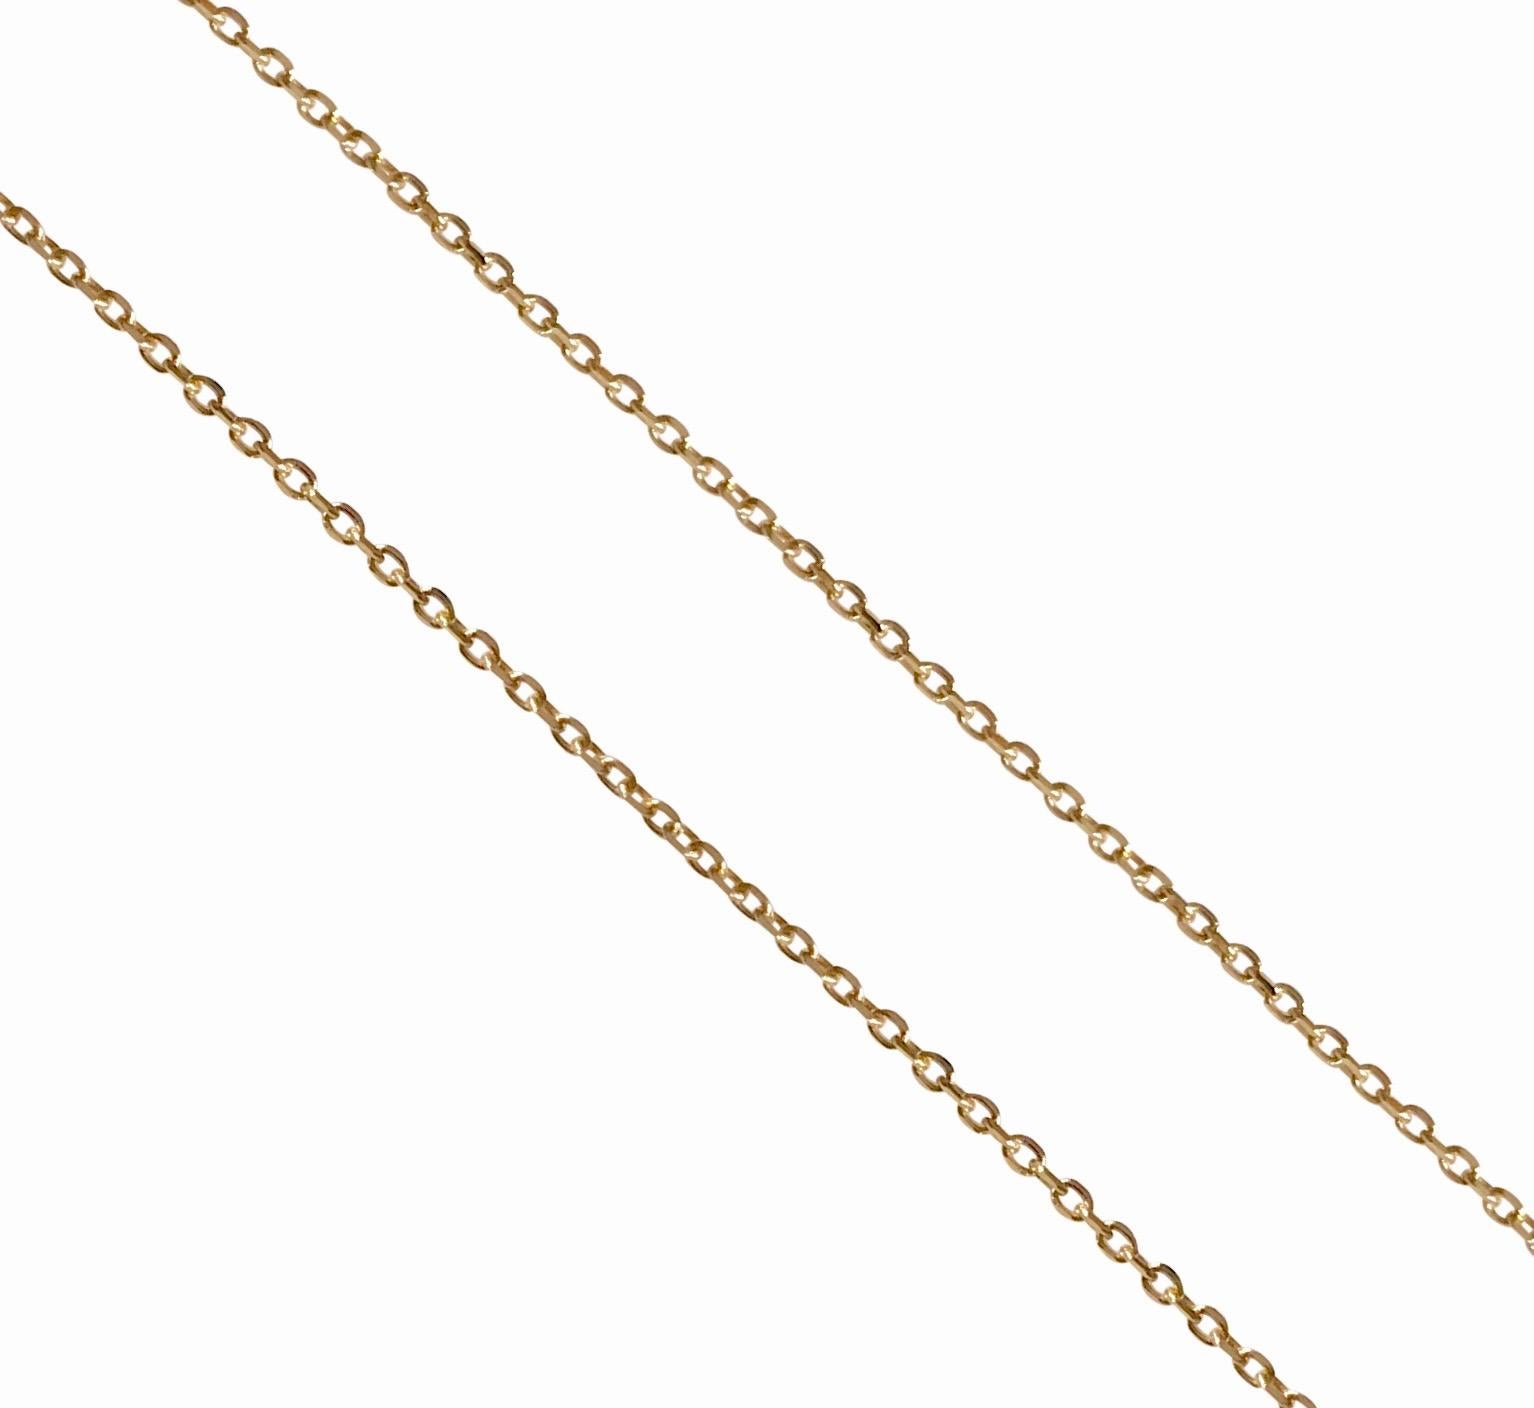 18Karat solid yellow gold fine chain.
Ideal to wear with pendants.
Weight: 2.15g
Length : 56.00 cm 
Gauge:  0.7 mm
Hallmark: London’s Goldsmiths’ Company –  Assay Office 
All our jewellery are new and have never been previously owned or worn. 
We